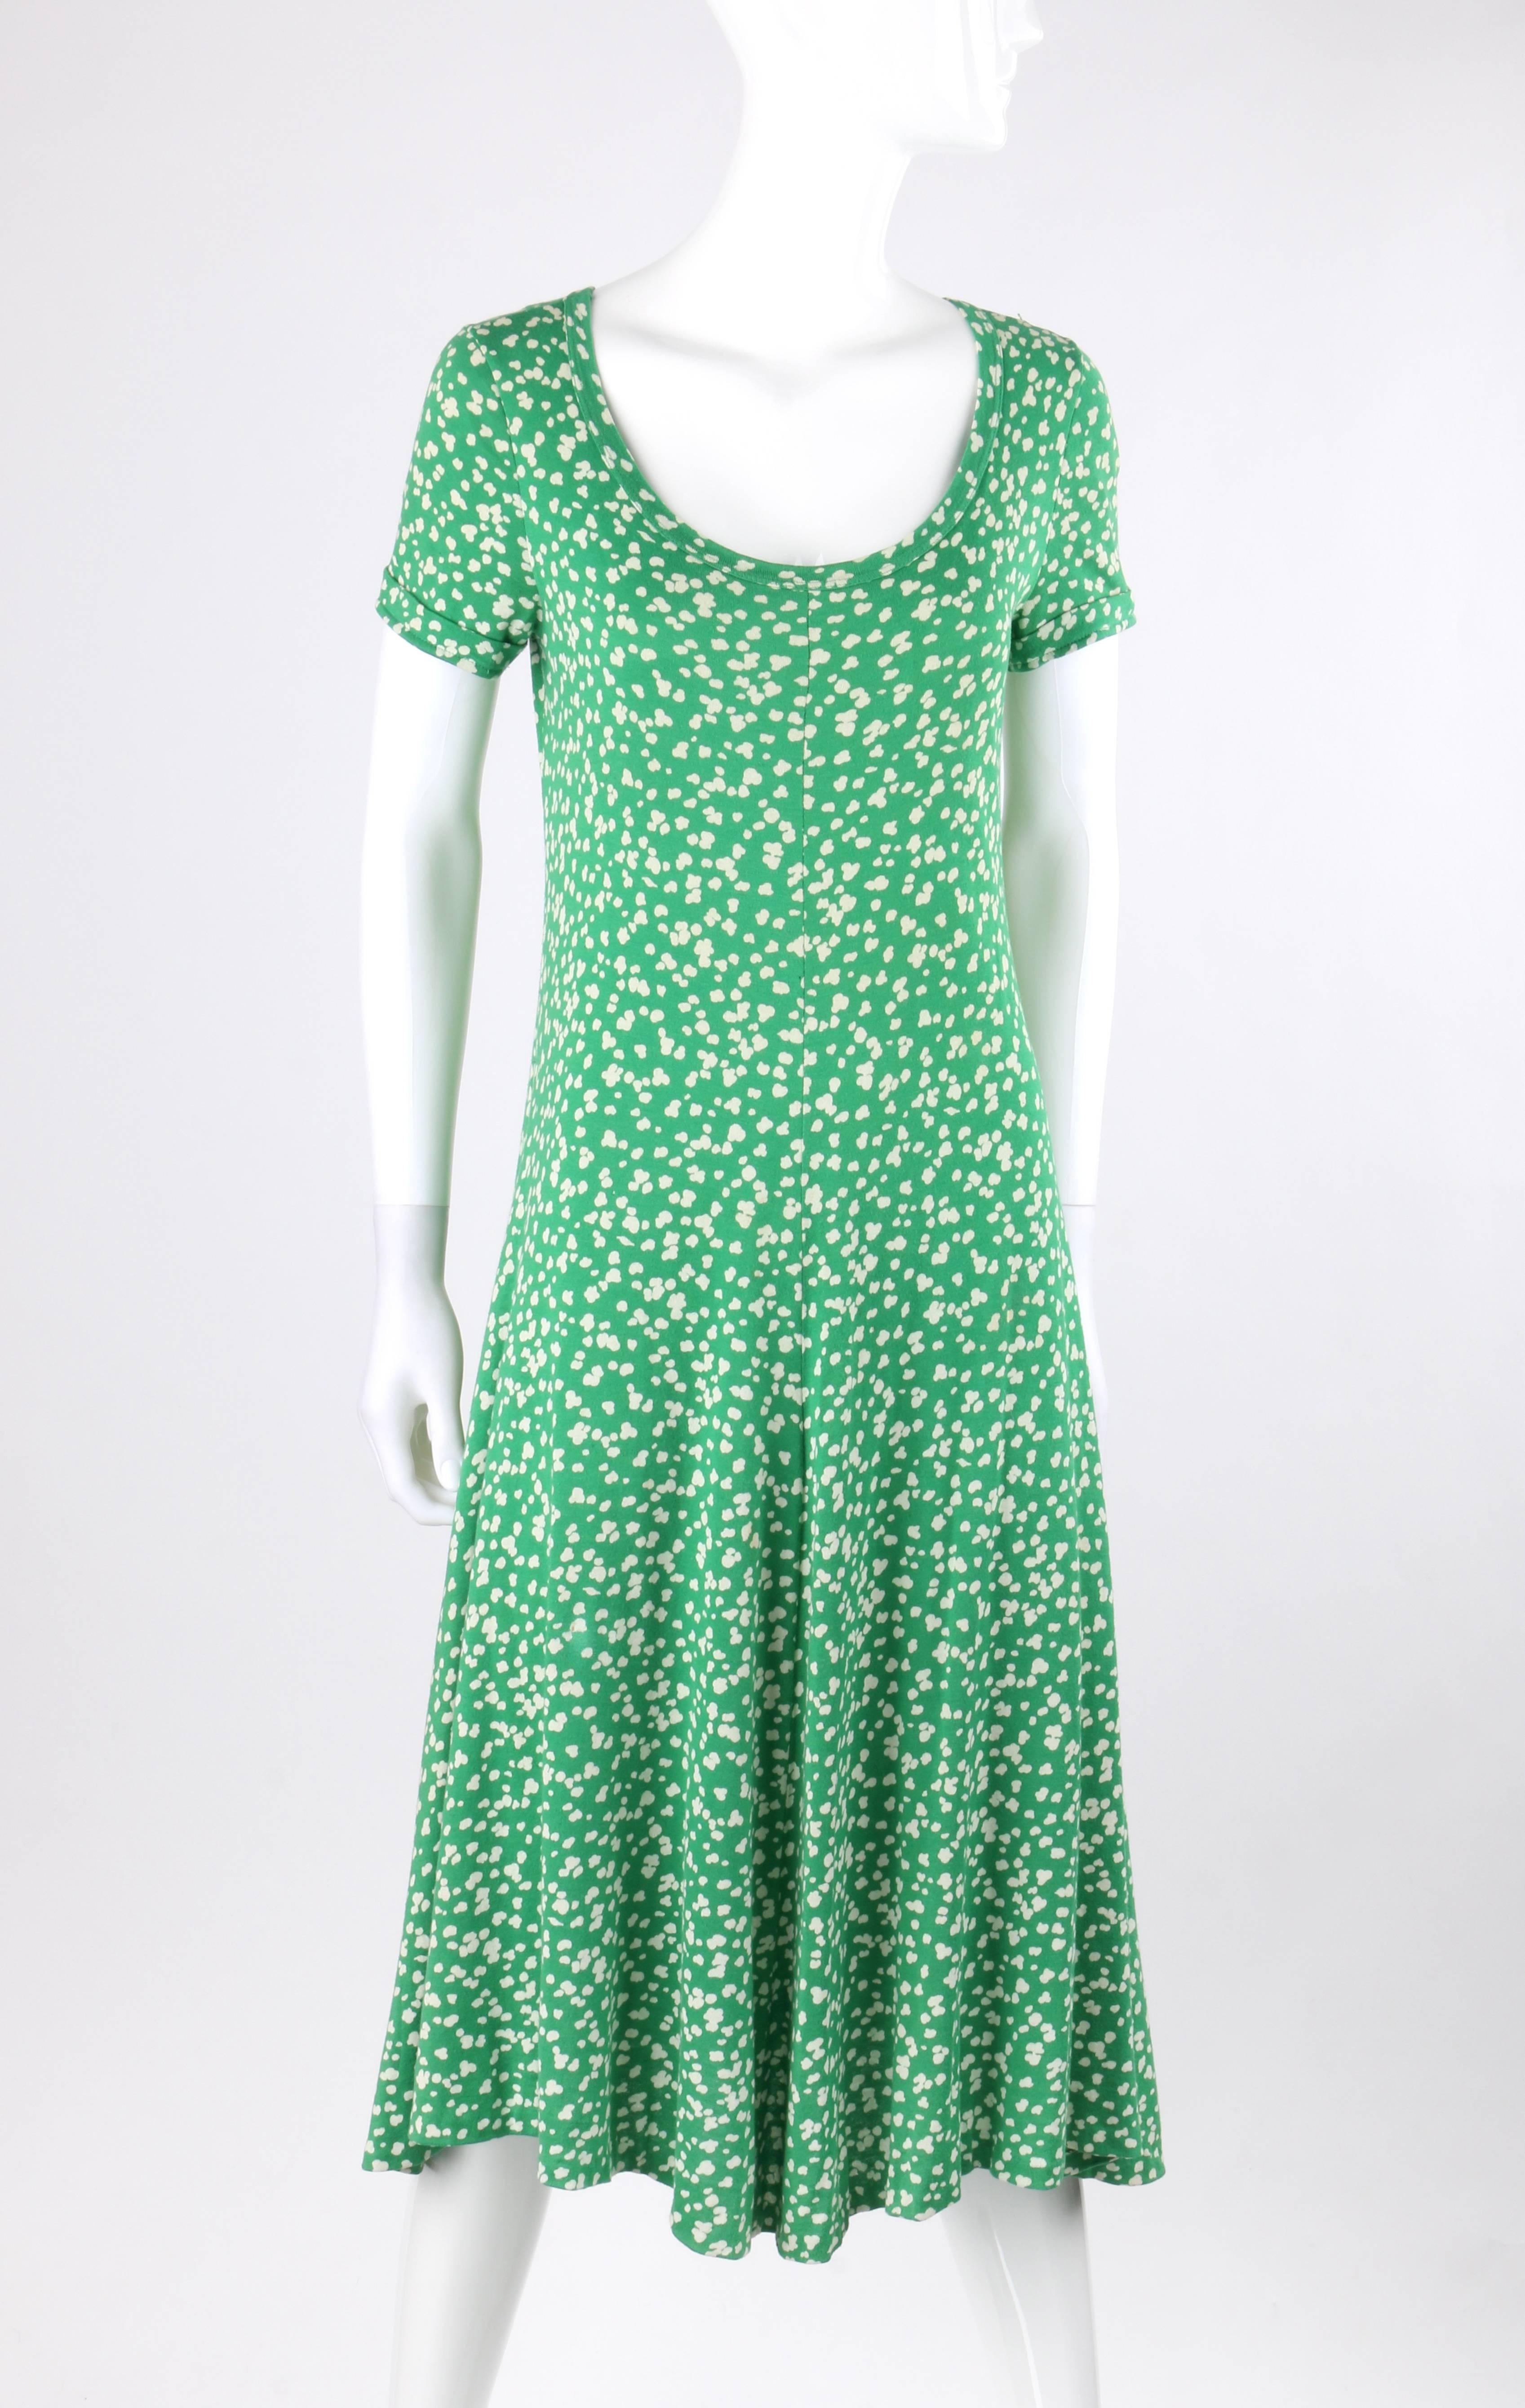 Vintage Diane Von Furstenberg DVF c.1970's green abstract dot print knit shift dress. Off white abstract dot print on kelly green cotton knit. Deep scoop neckline. Short sleeves with turned up cuffs. Bias cut. Slip-on shift style. Unlined. Marked